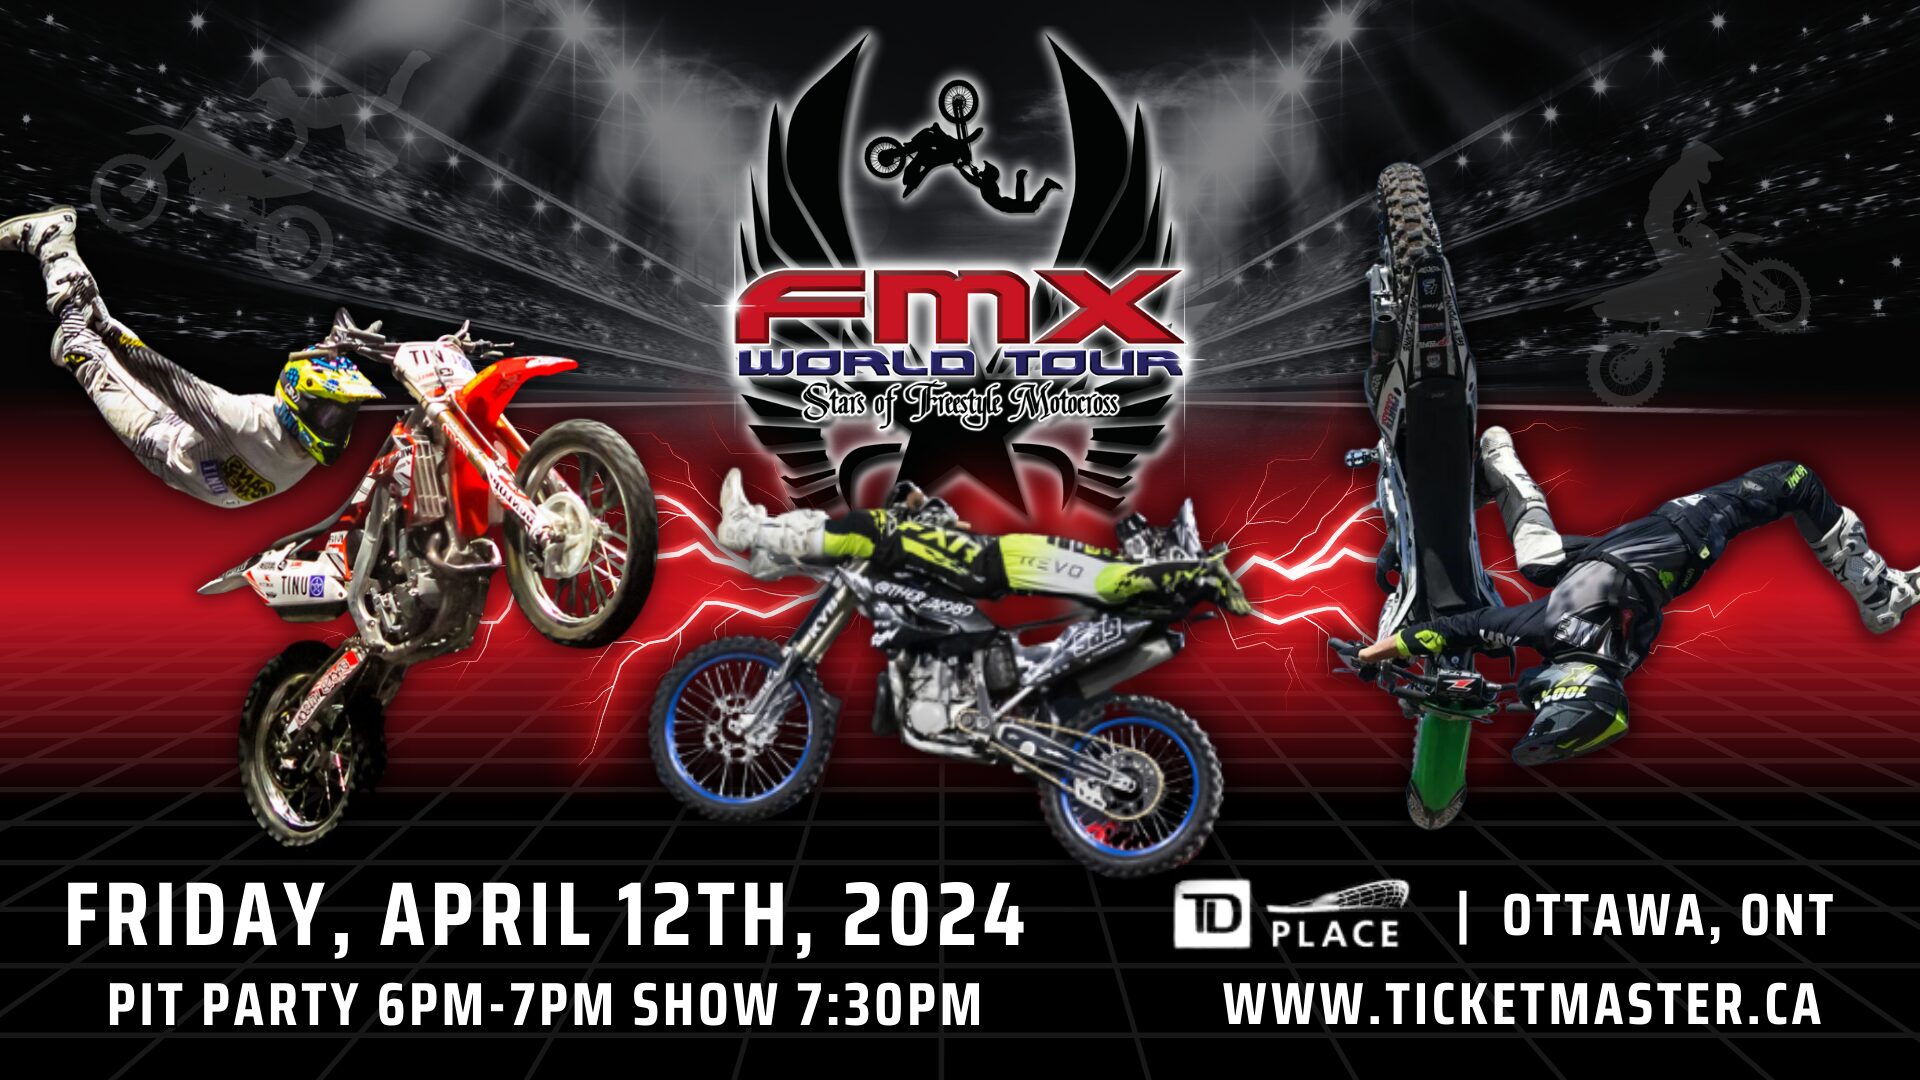 FMX on April 12 2024 in ottawa, ON at TD Place